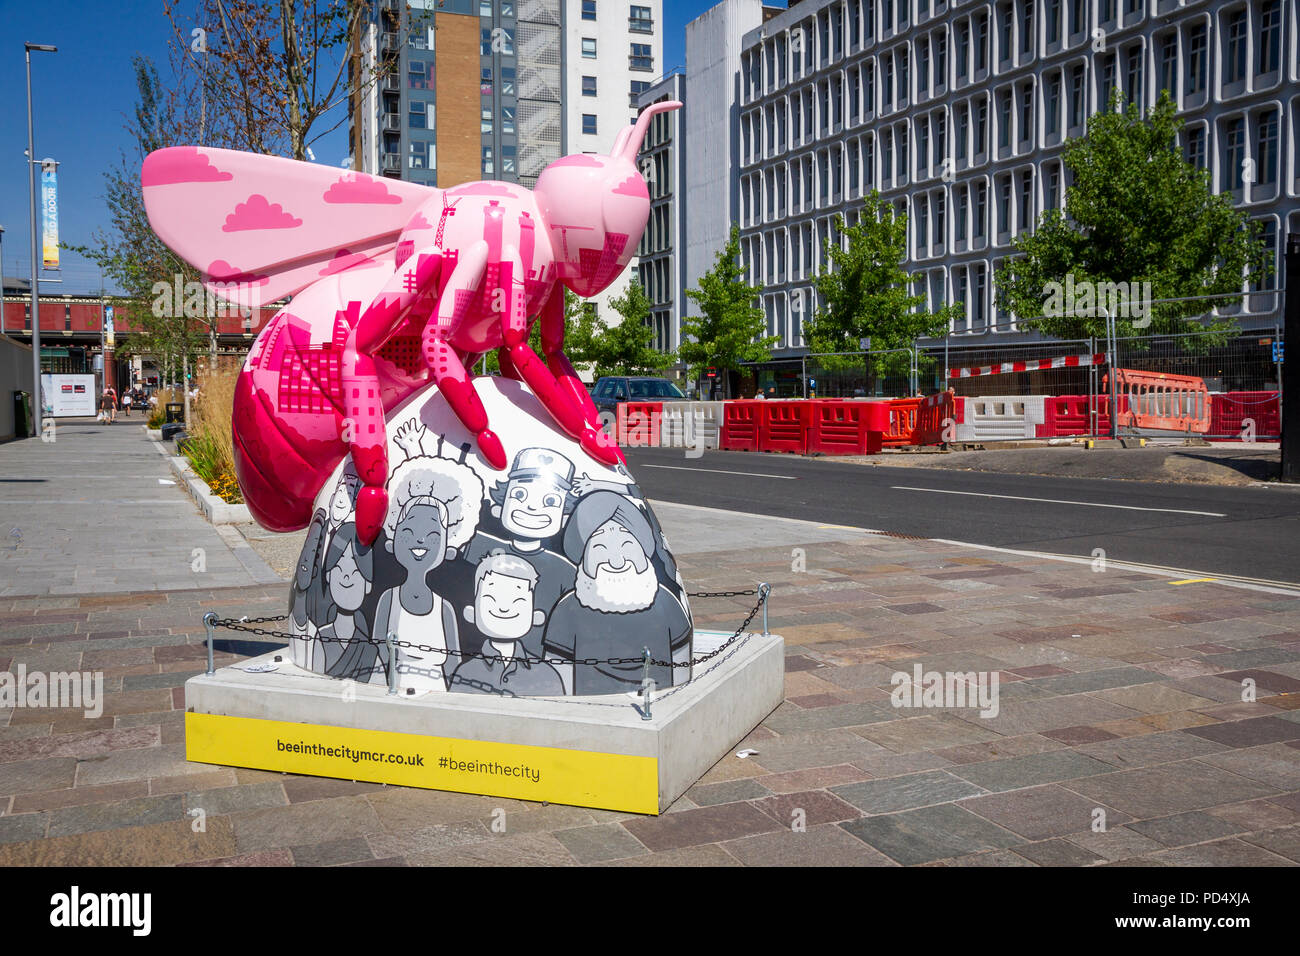 City in the Bee - Hammo. Bee in the City, public art event in the City of Manchester. Over 100 bees on a free family fun trail. Stock Photo